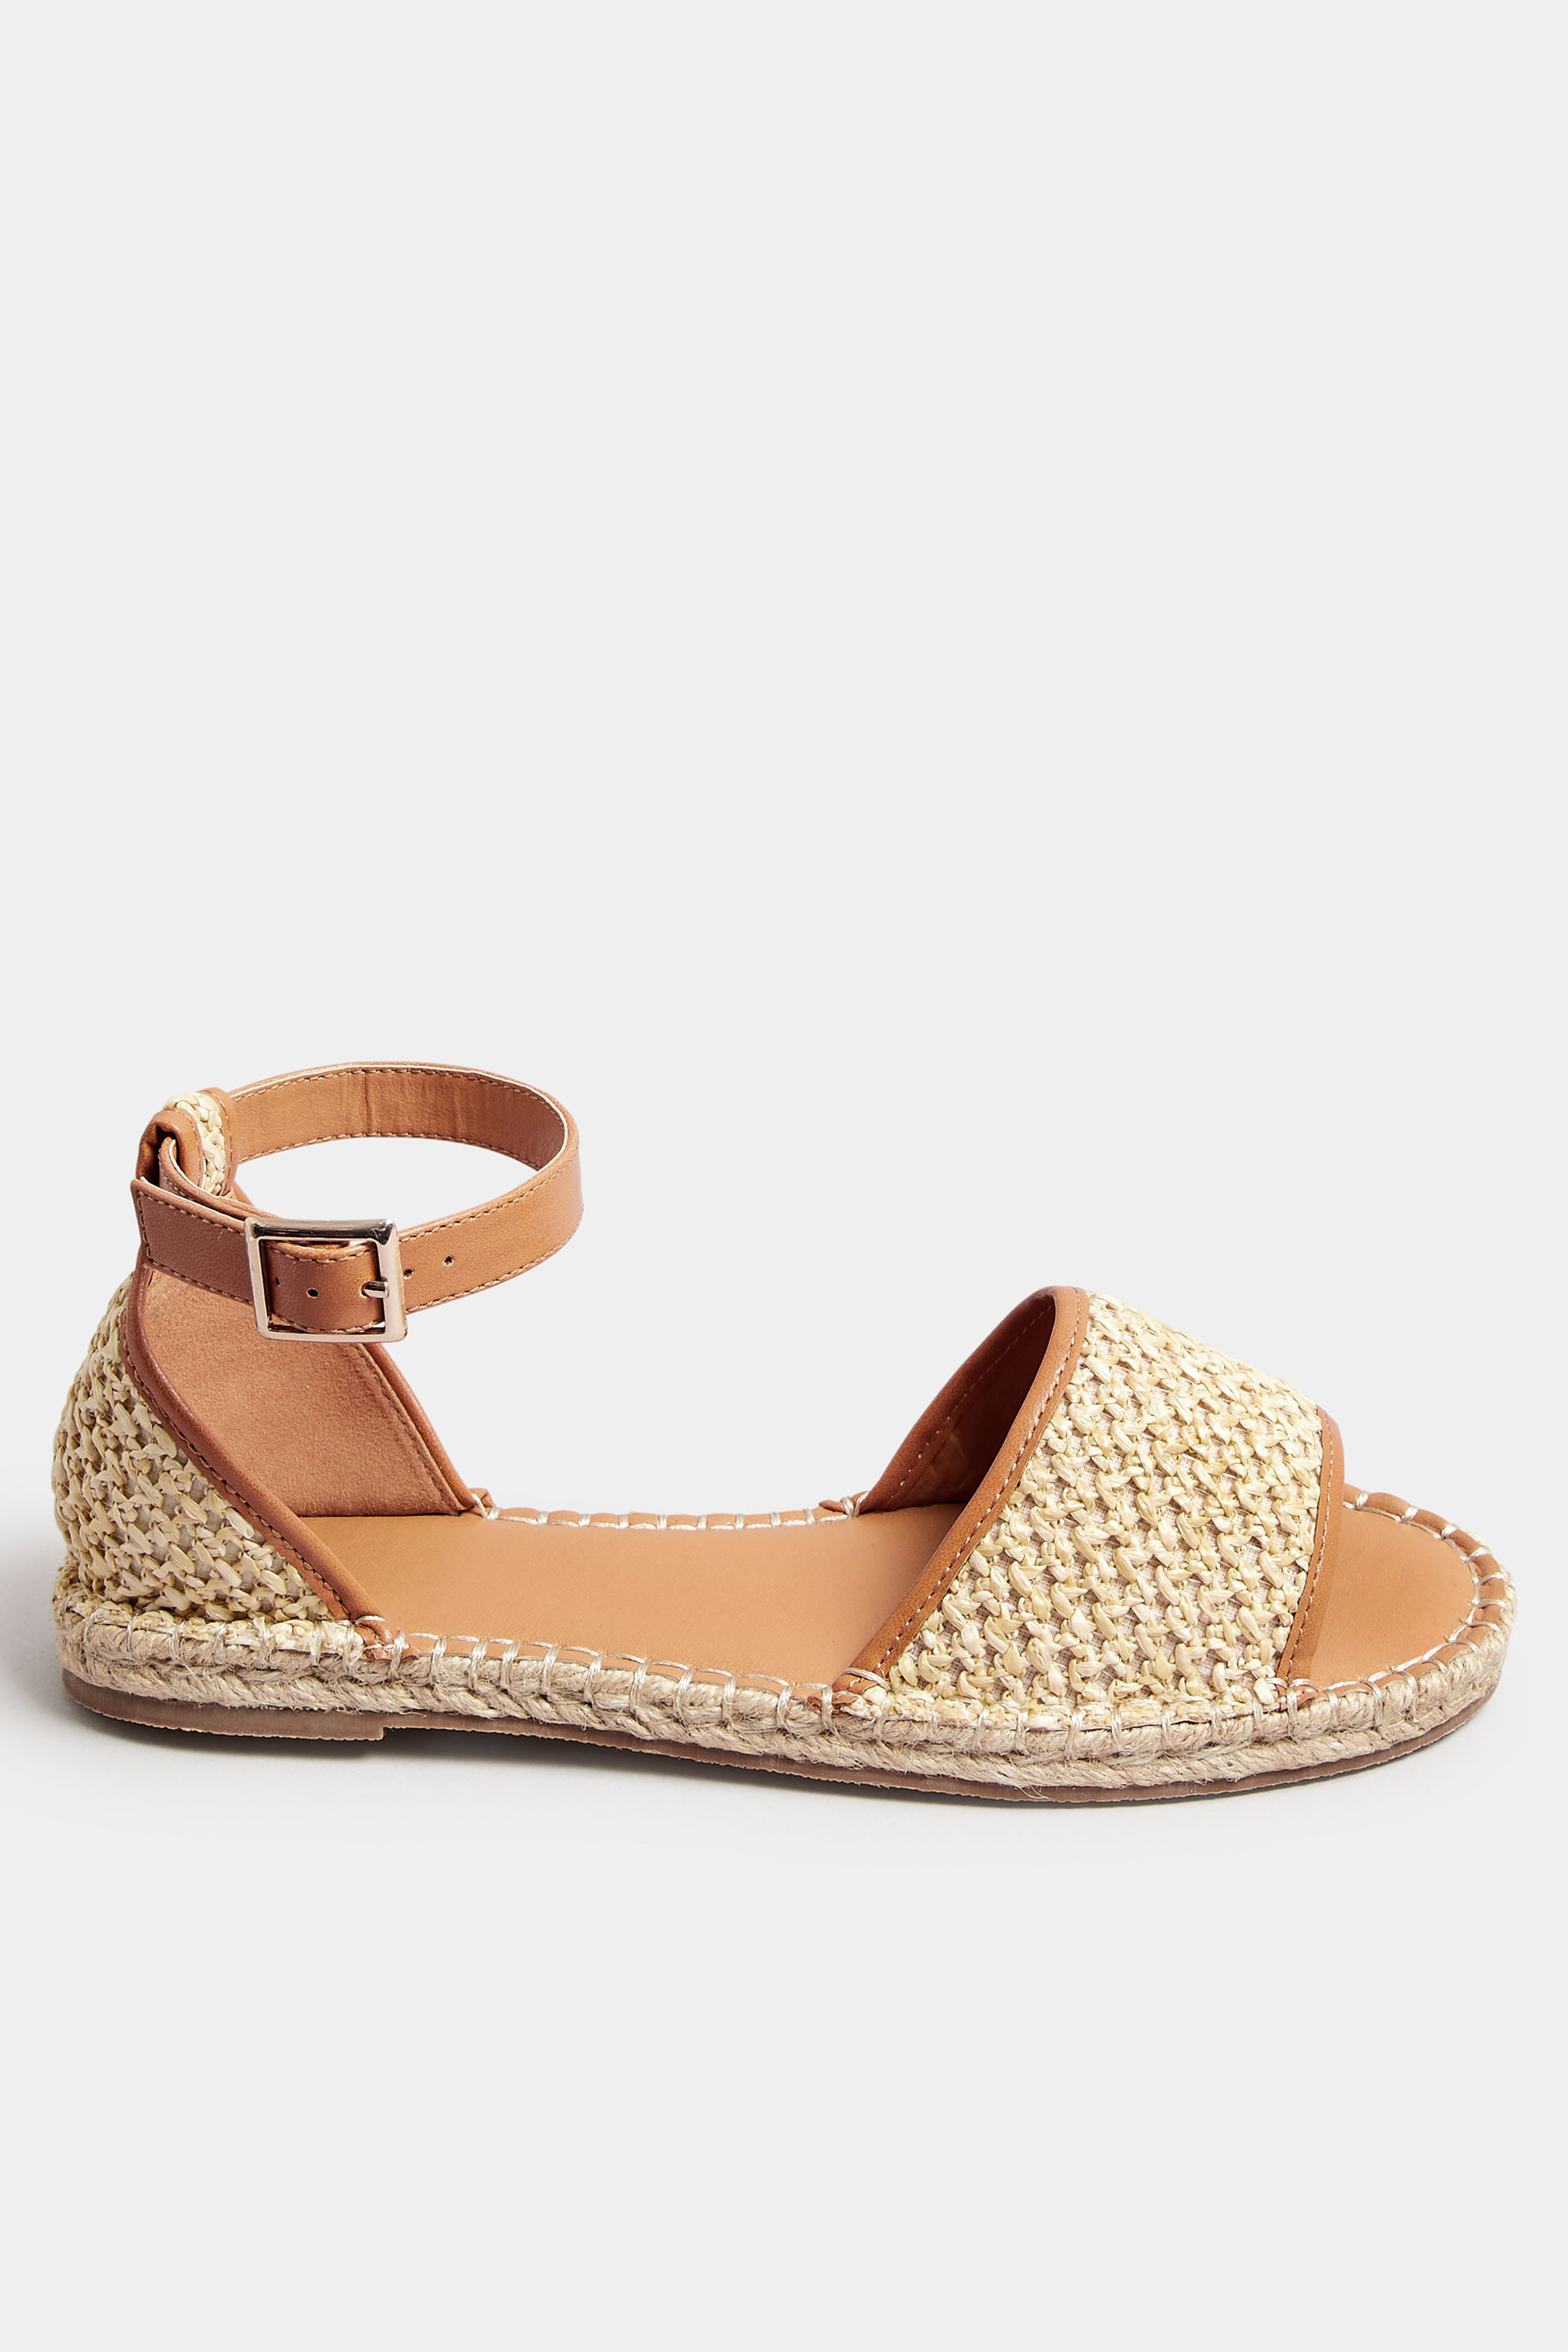 LTS Brown Espadrille Open Toe Sandals In Standard Fit | Long Tall Sally 3